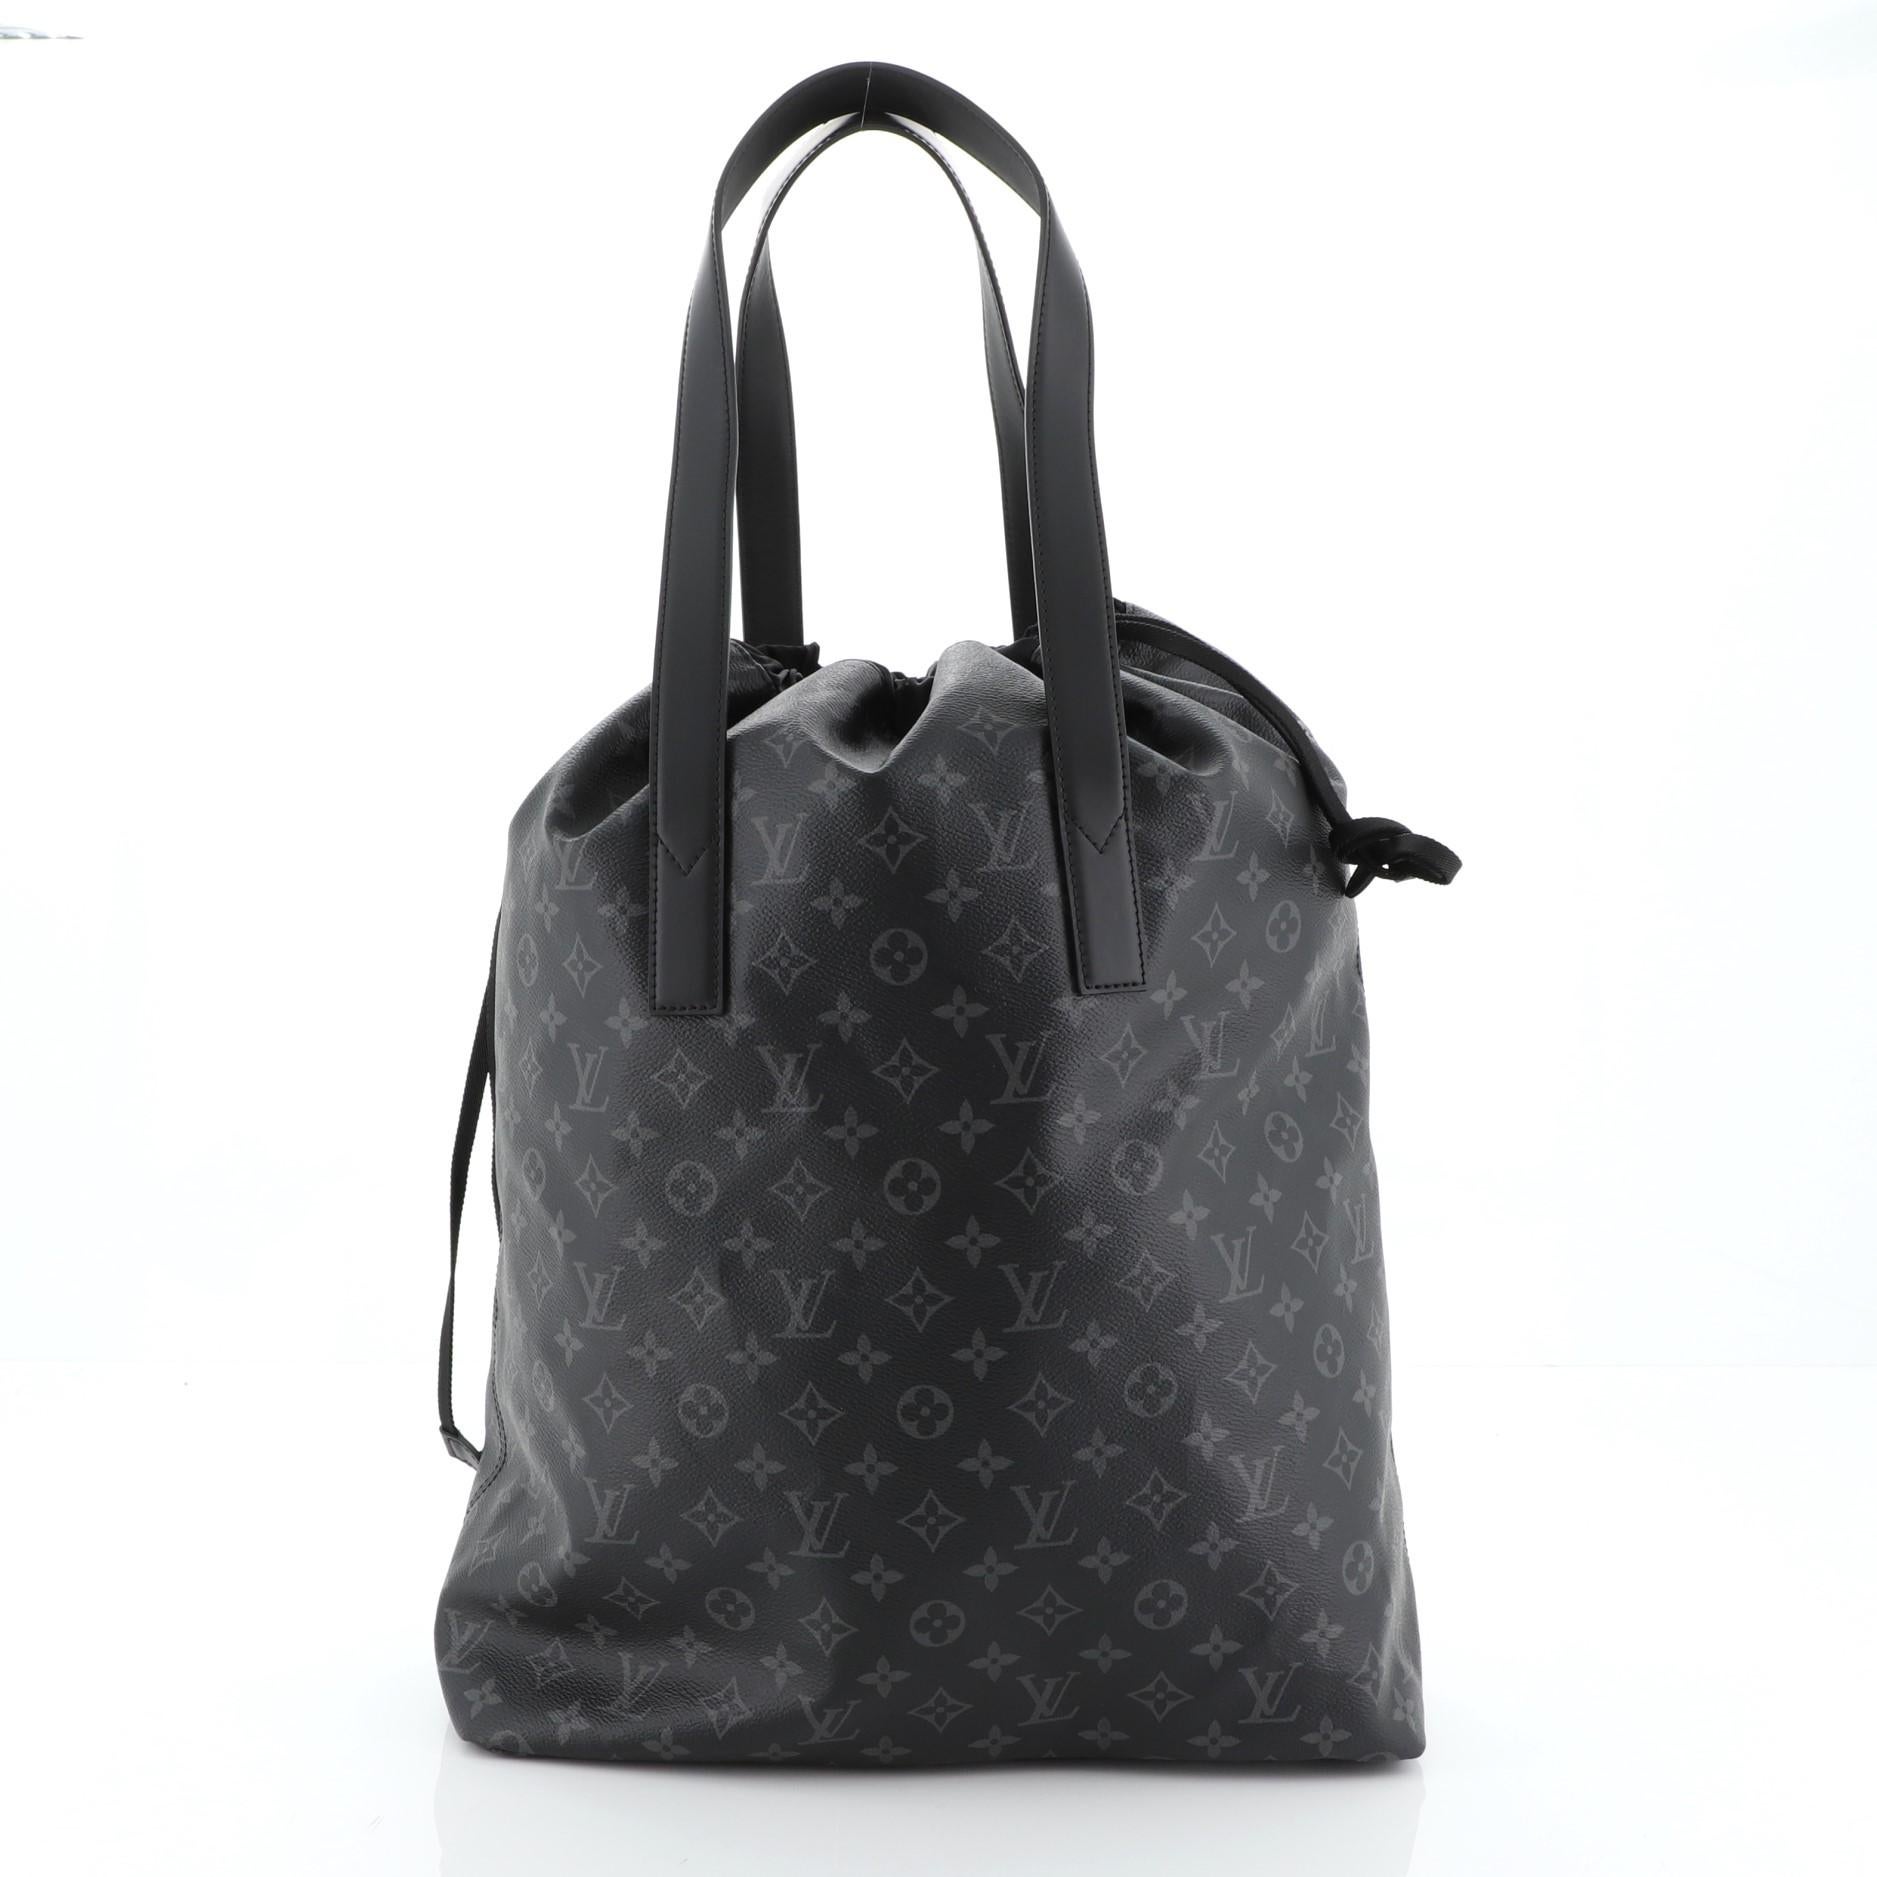 This Louis Vuitton Cabas Light Drawstring Bag Monogram Eclipse Canvas, crafted in black monogram eclipse coated canvas, features dual flat leather handles and silver-tone hardware. Its drawstring closure opens to a black nylon interior. Authenticity